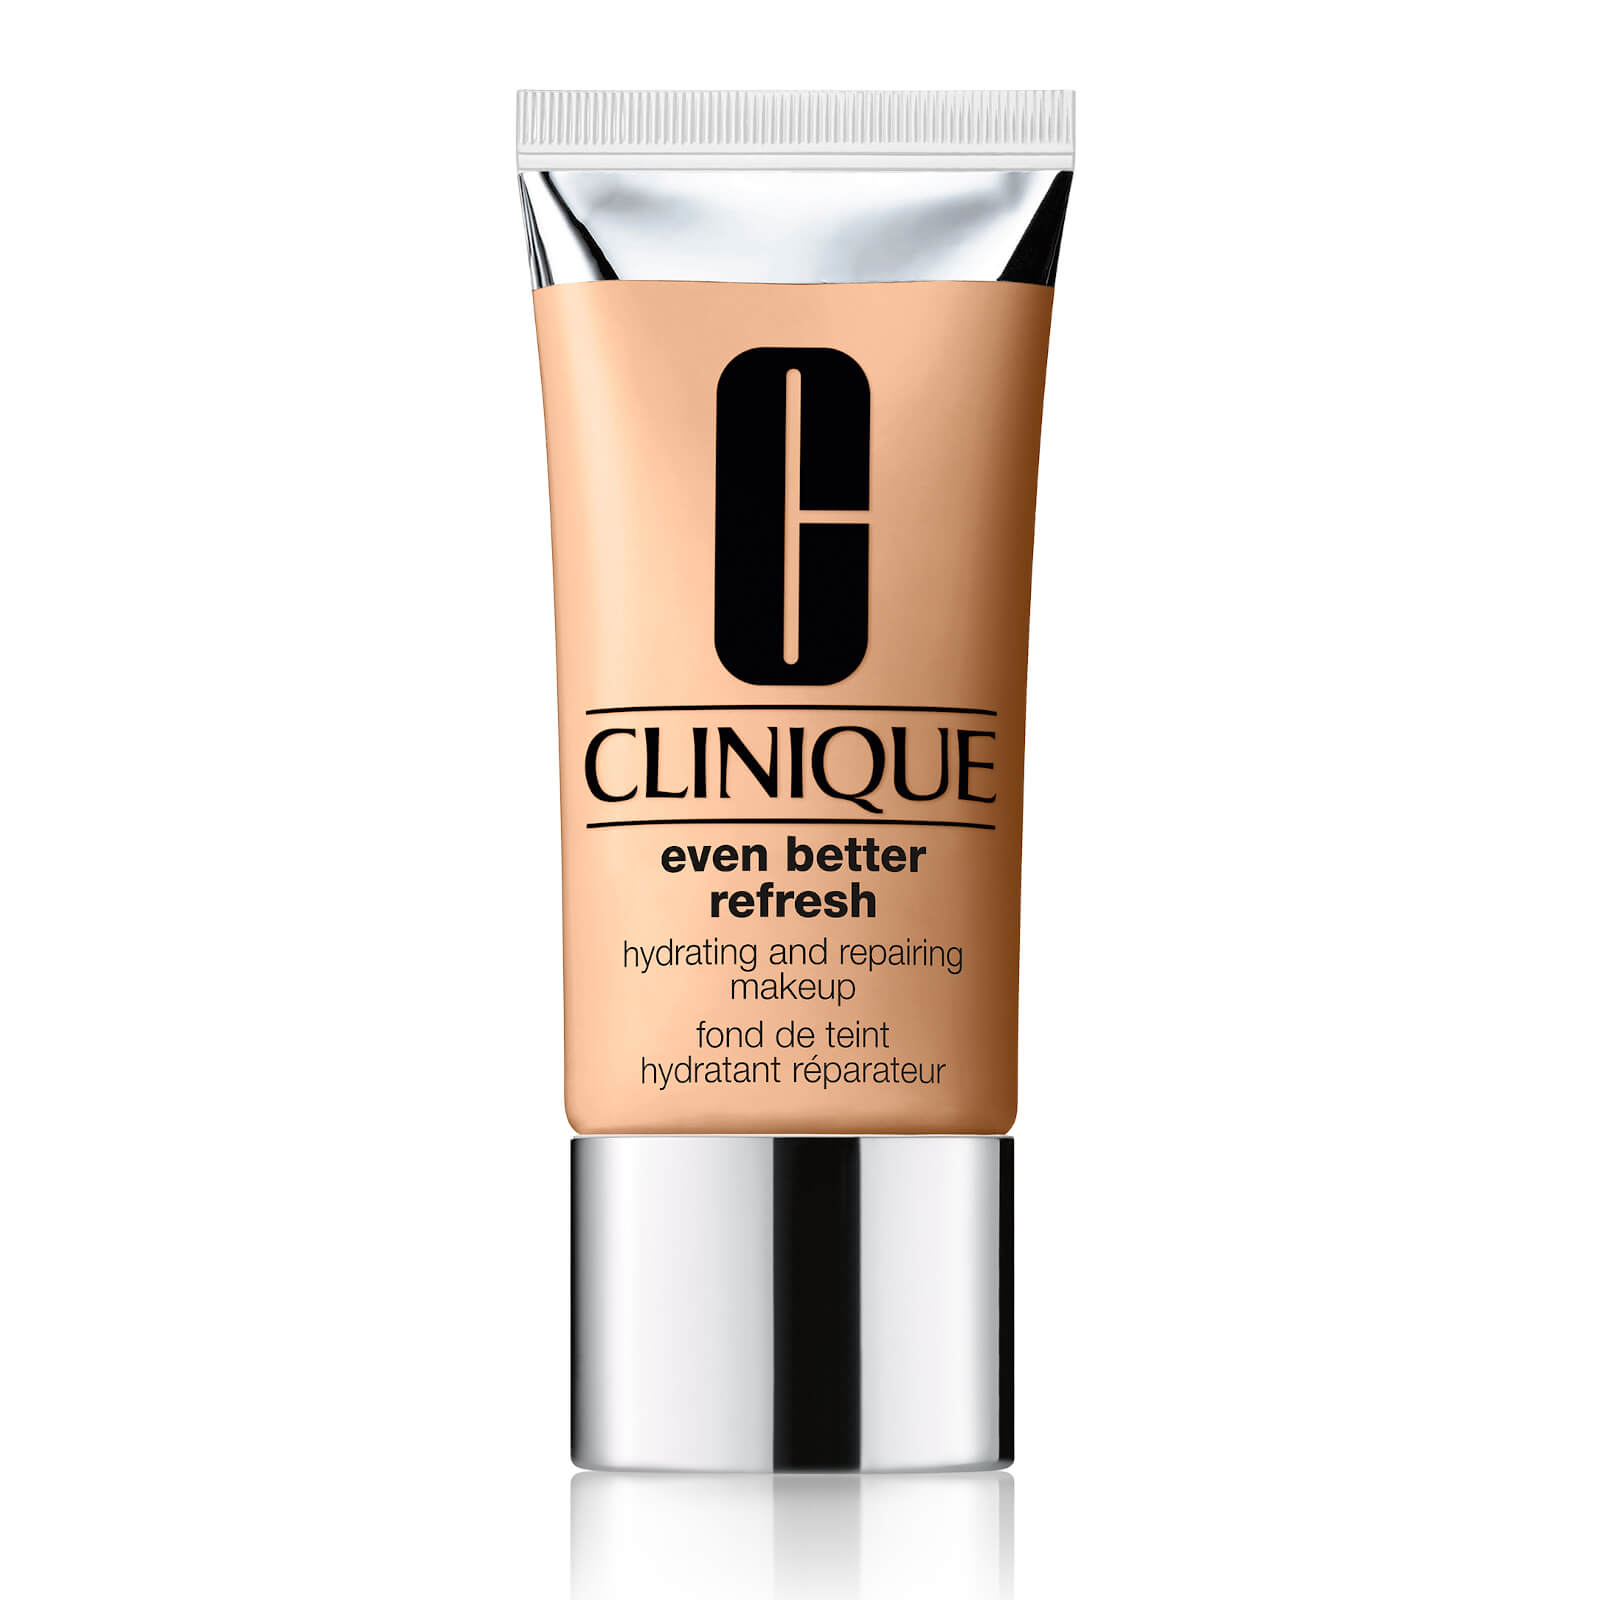 Clinique Even Better Refresh Hydrating and Repairing Makeup 30ml (Various Shades) - WN 30 Biscuit